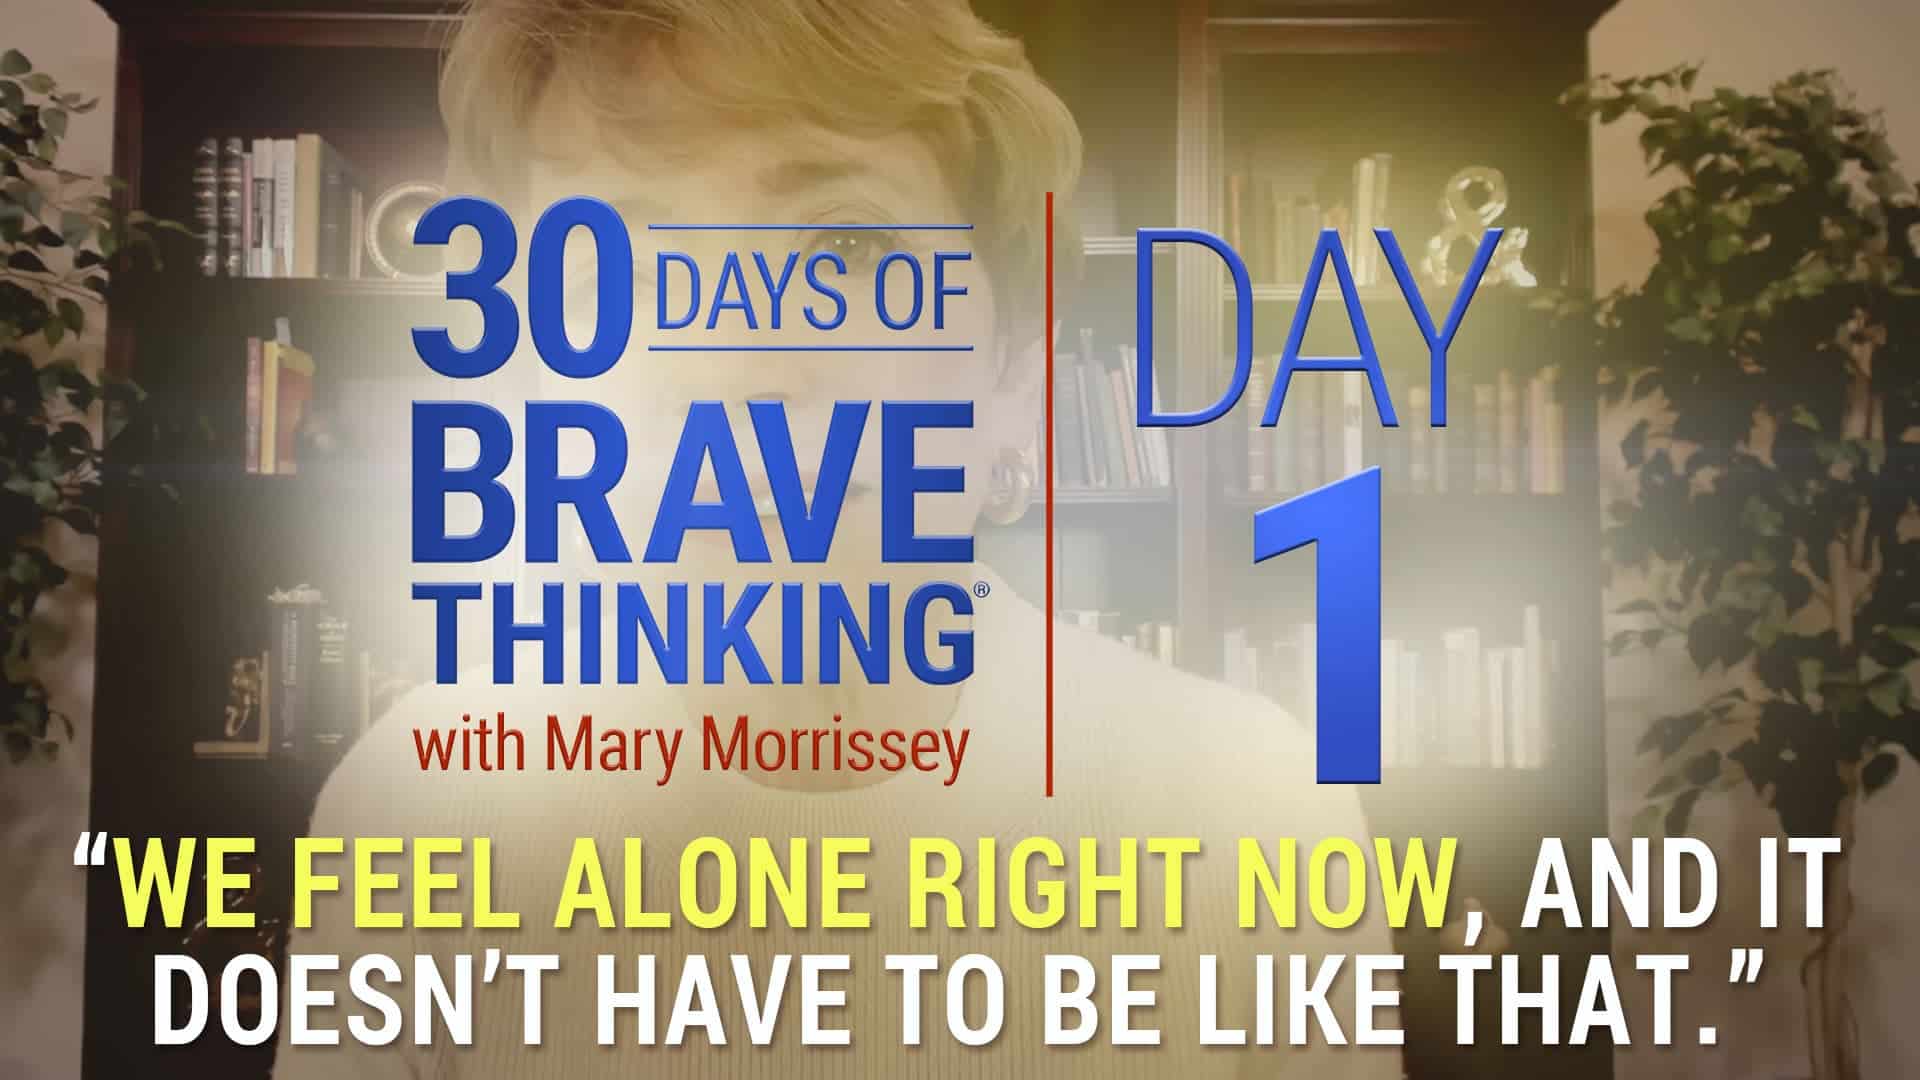 30 Days of Brave Thinking with Mary Morrissey | Brave Thinking Institute